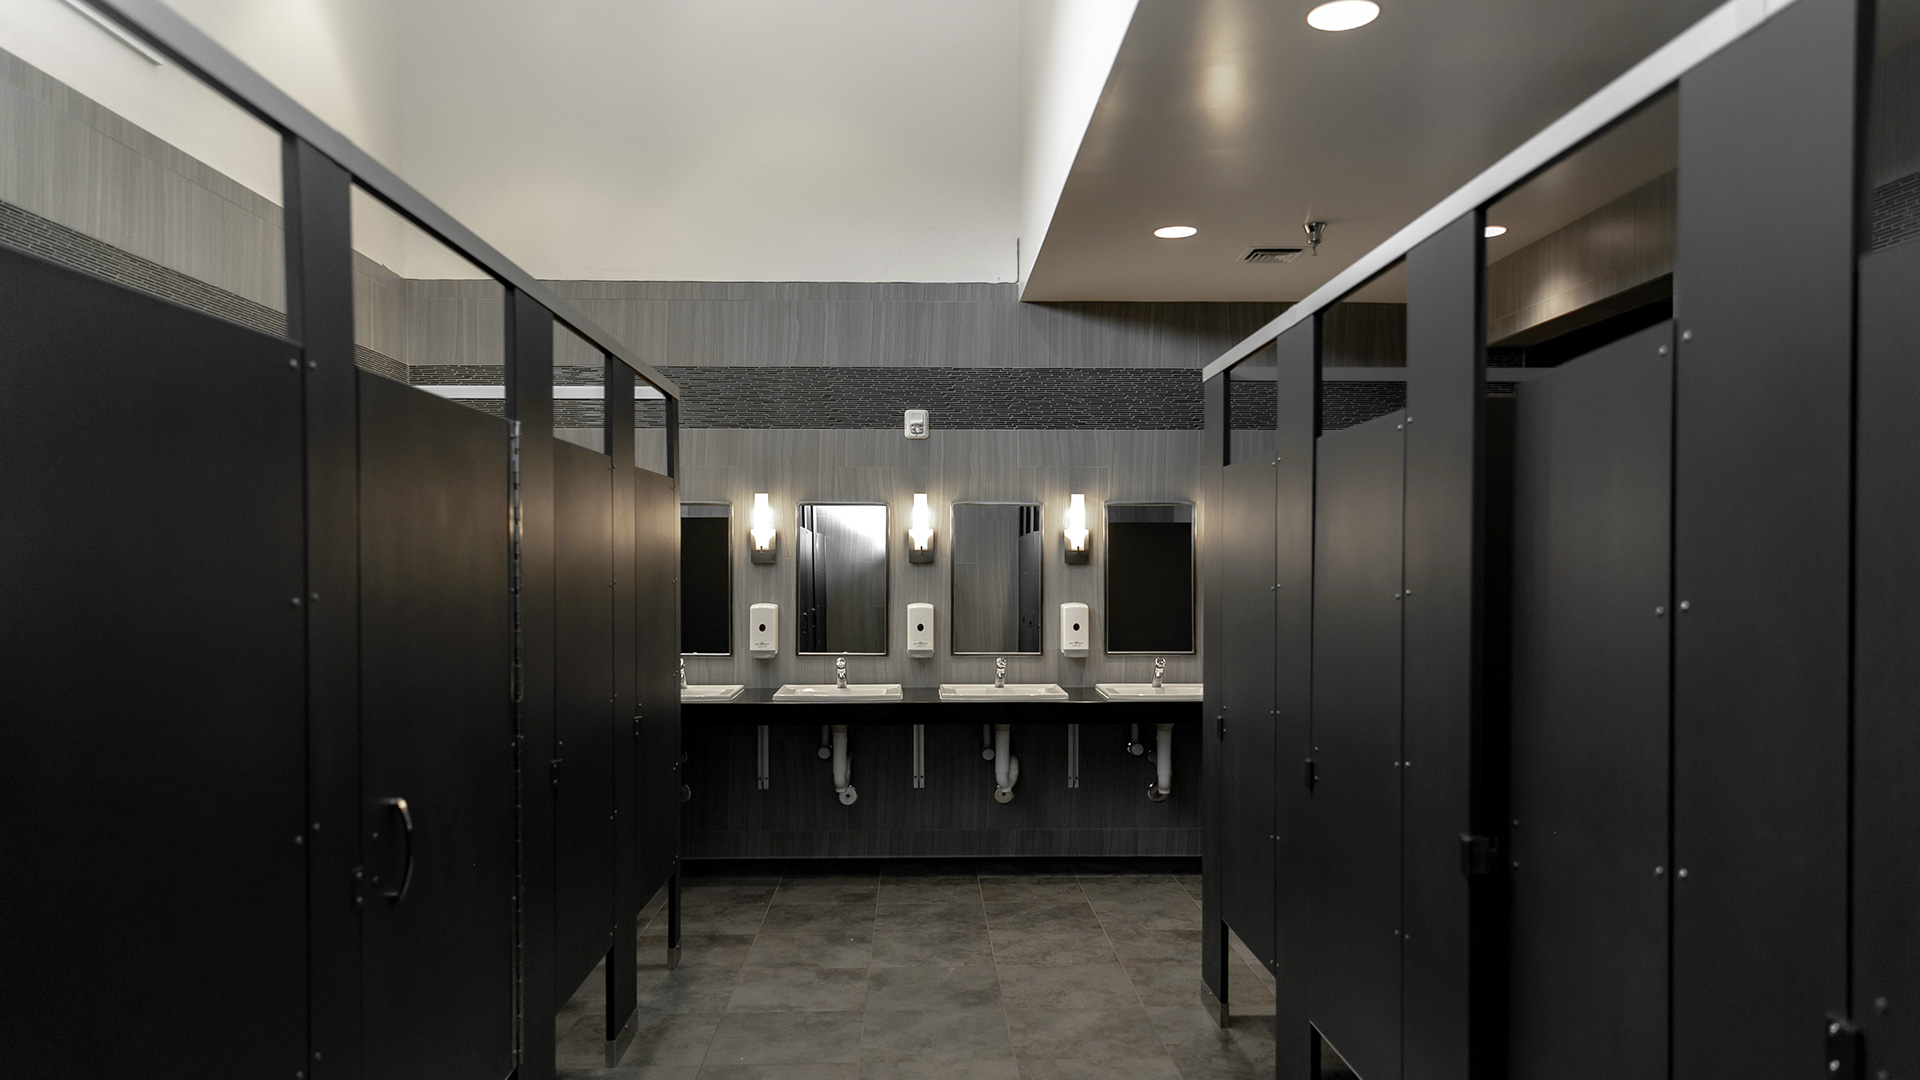 Interior of bathroom, with double height ceilings, gray colors and black trim.